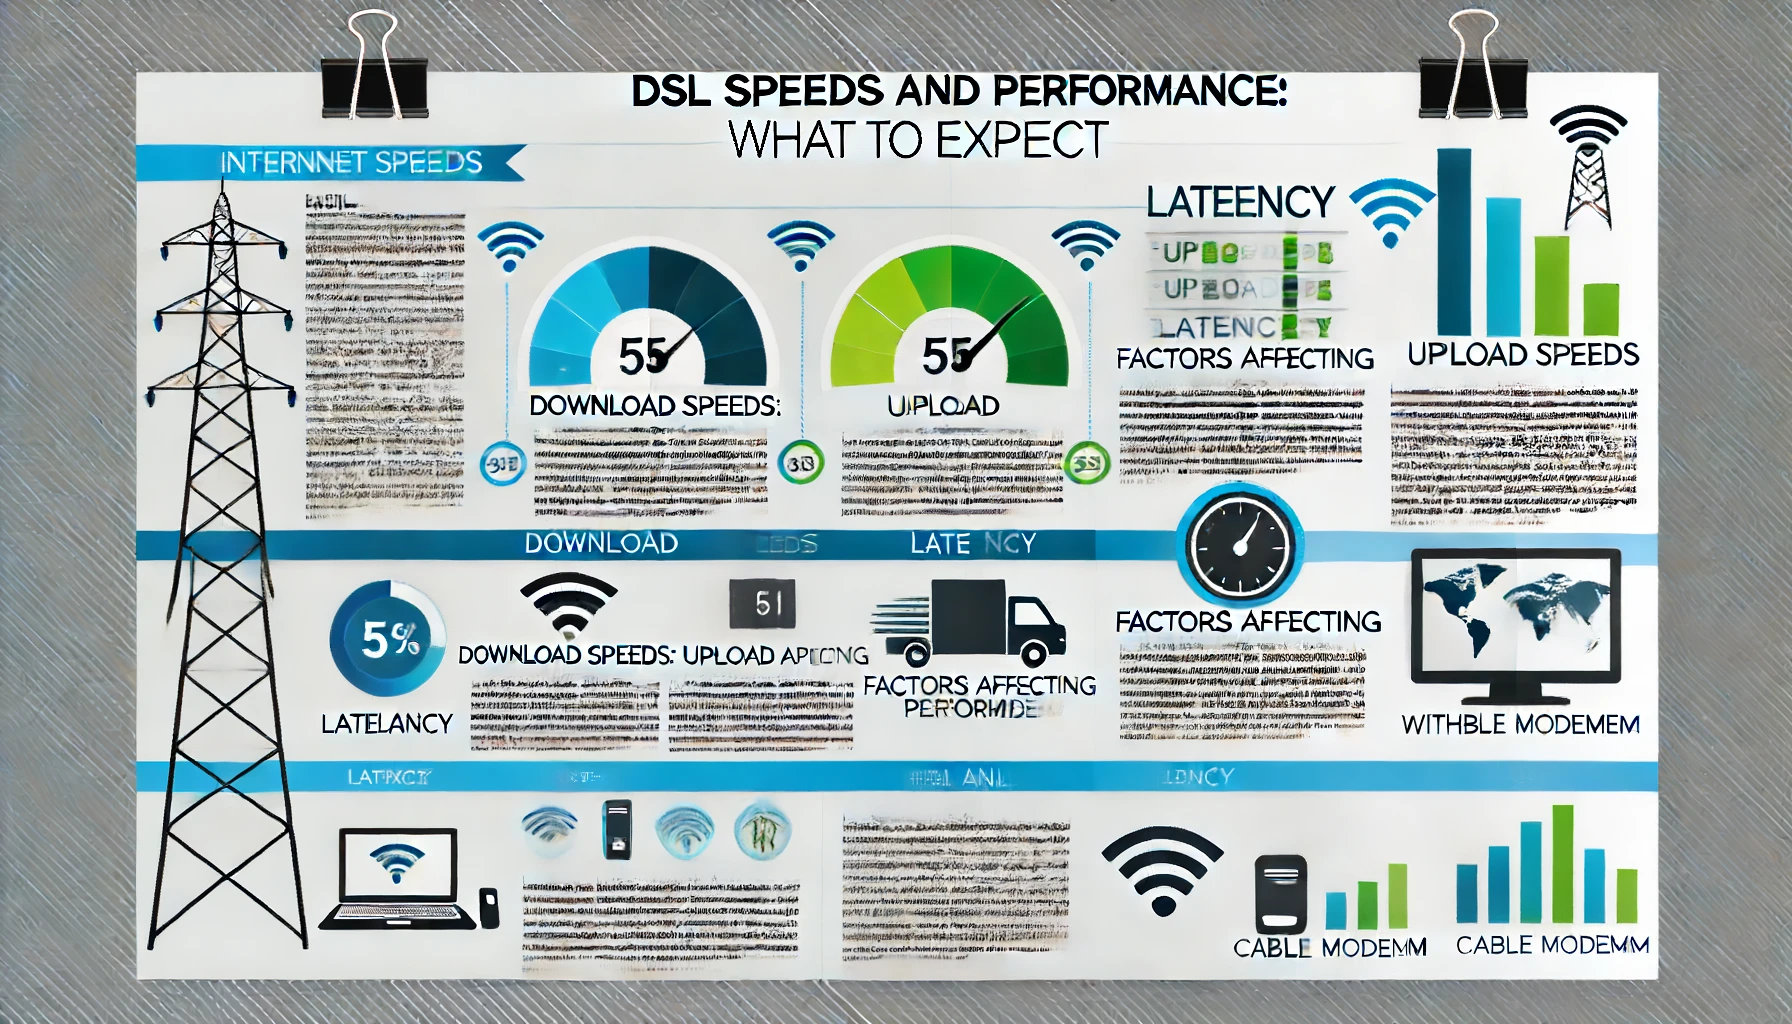 DSL Speeds and Performance: What to Expect